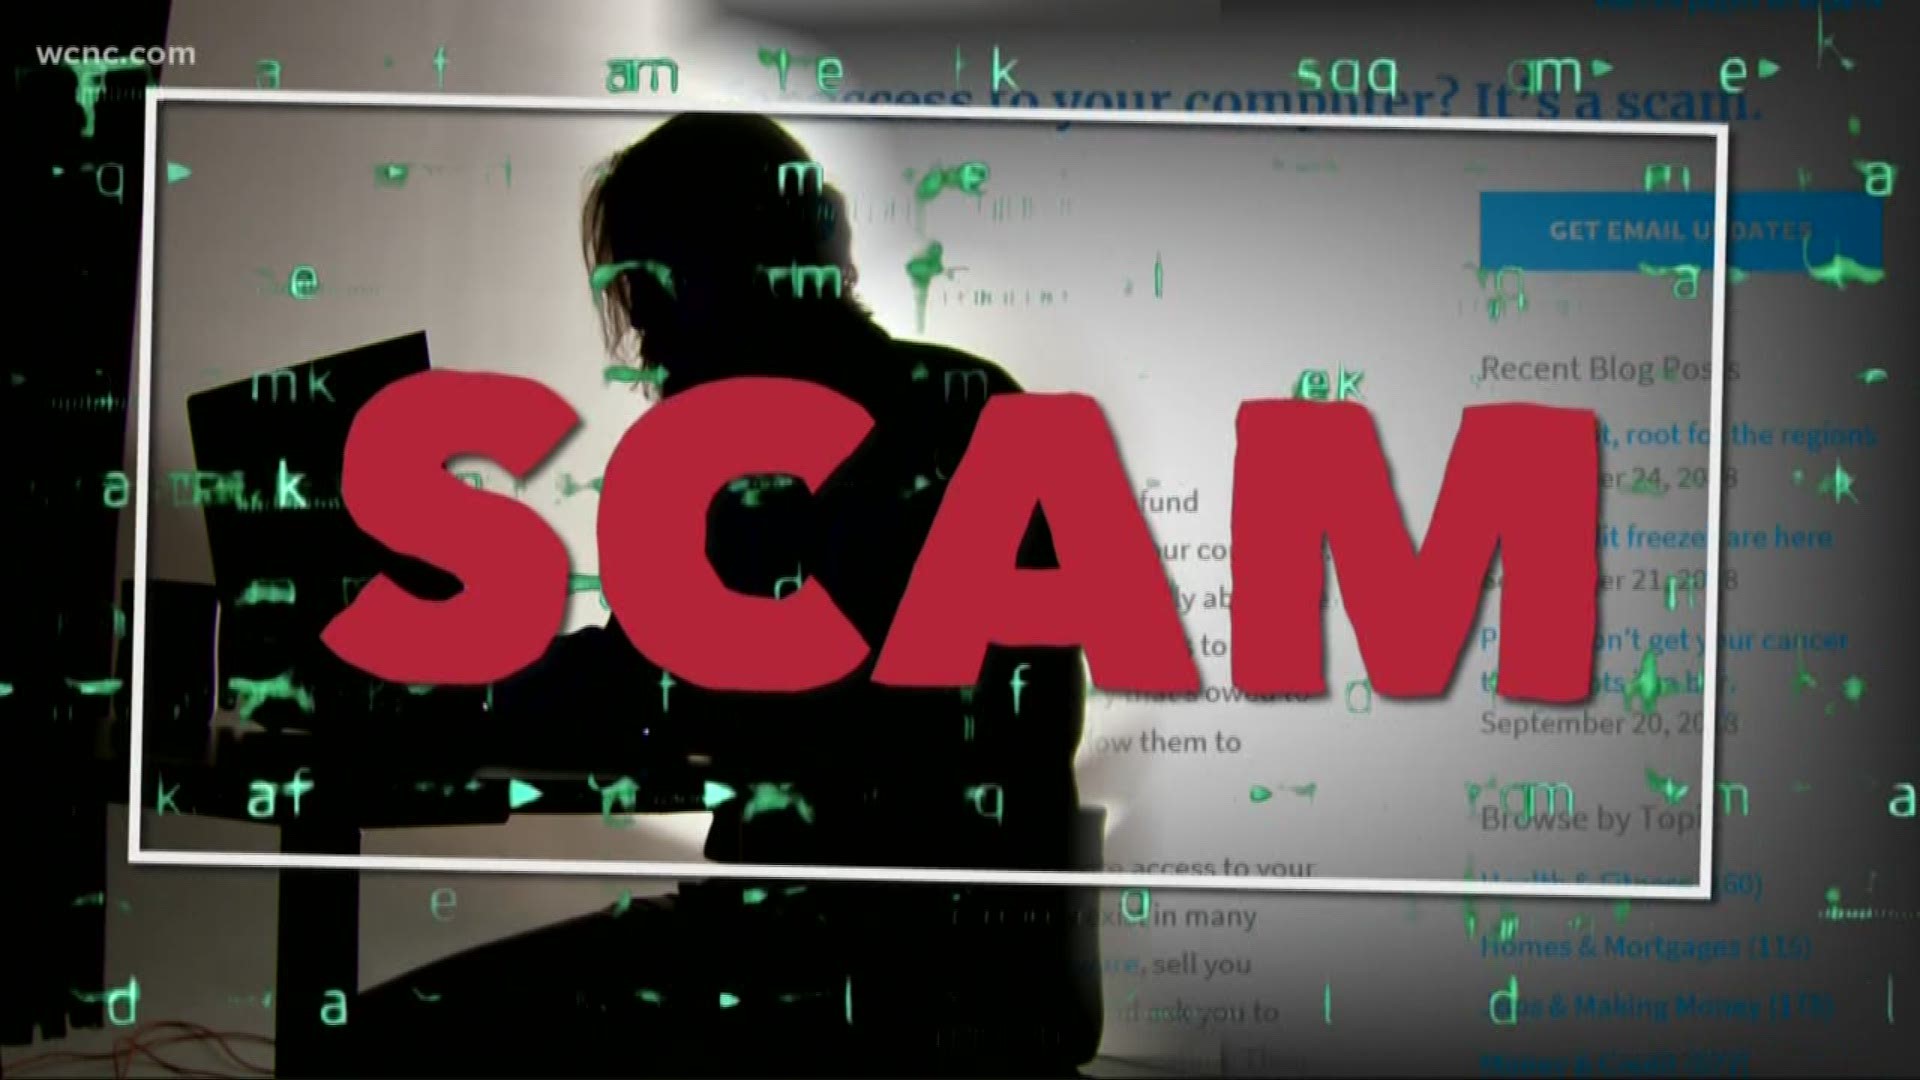 A woman reached out to NBC Charlotte after she got a phone call from scammers saying they had detected fraud activity on her computer.